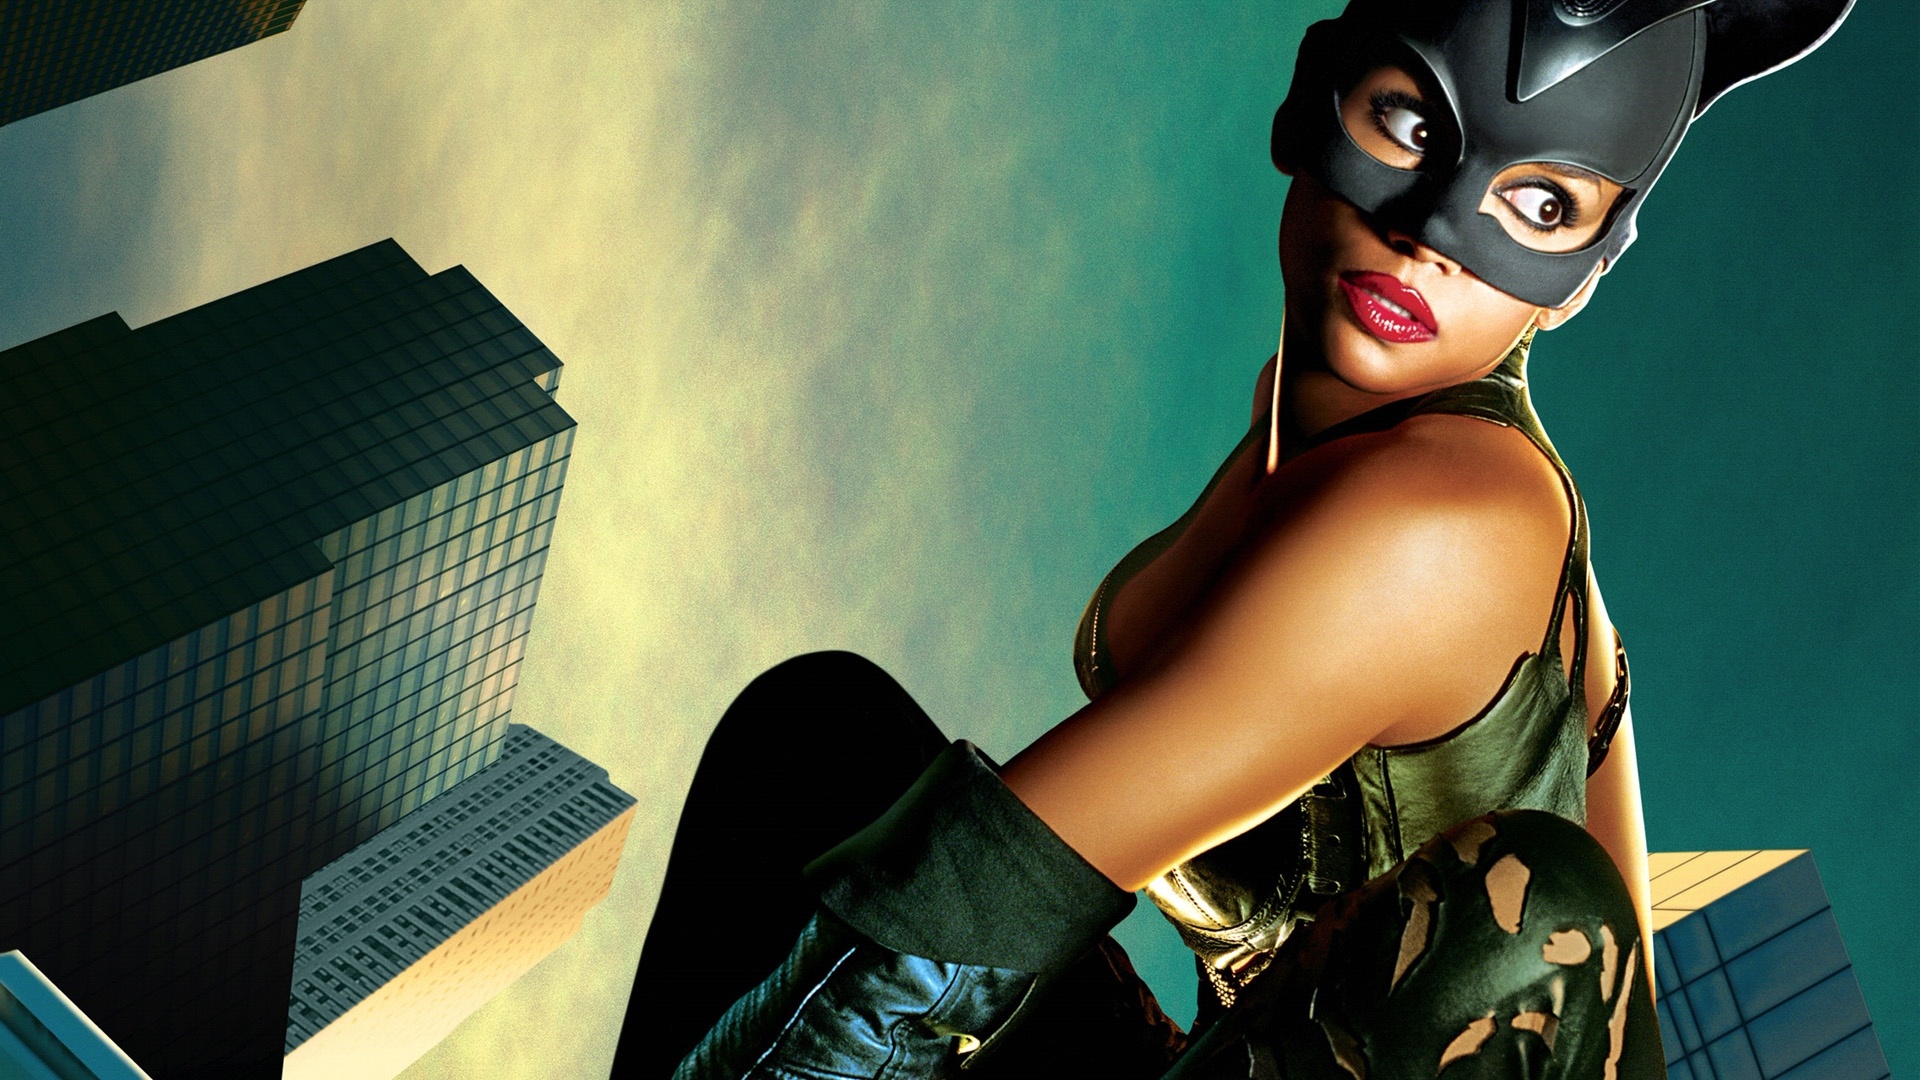 Halle Berry: Catwoman, A 2004 American superhero film, Patience Phillips. 1920x1080 Full HD Background.